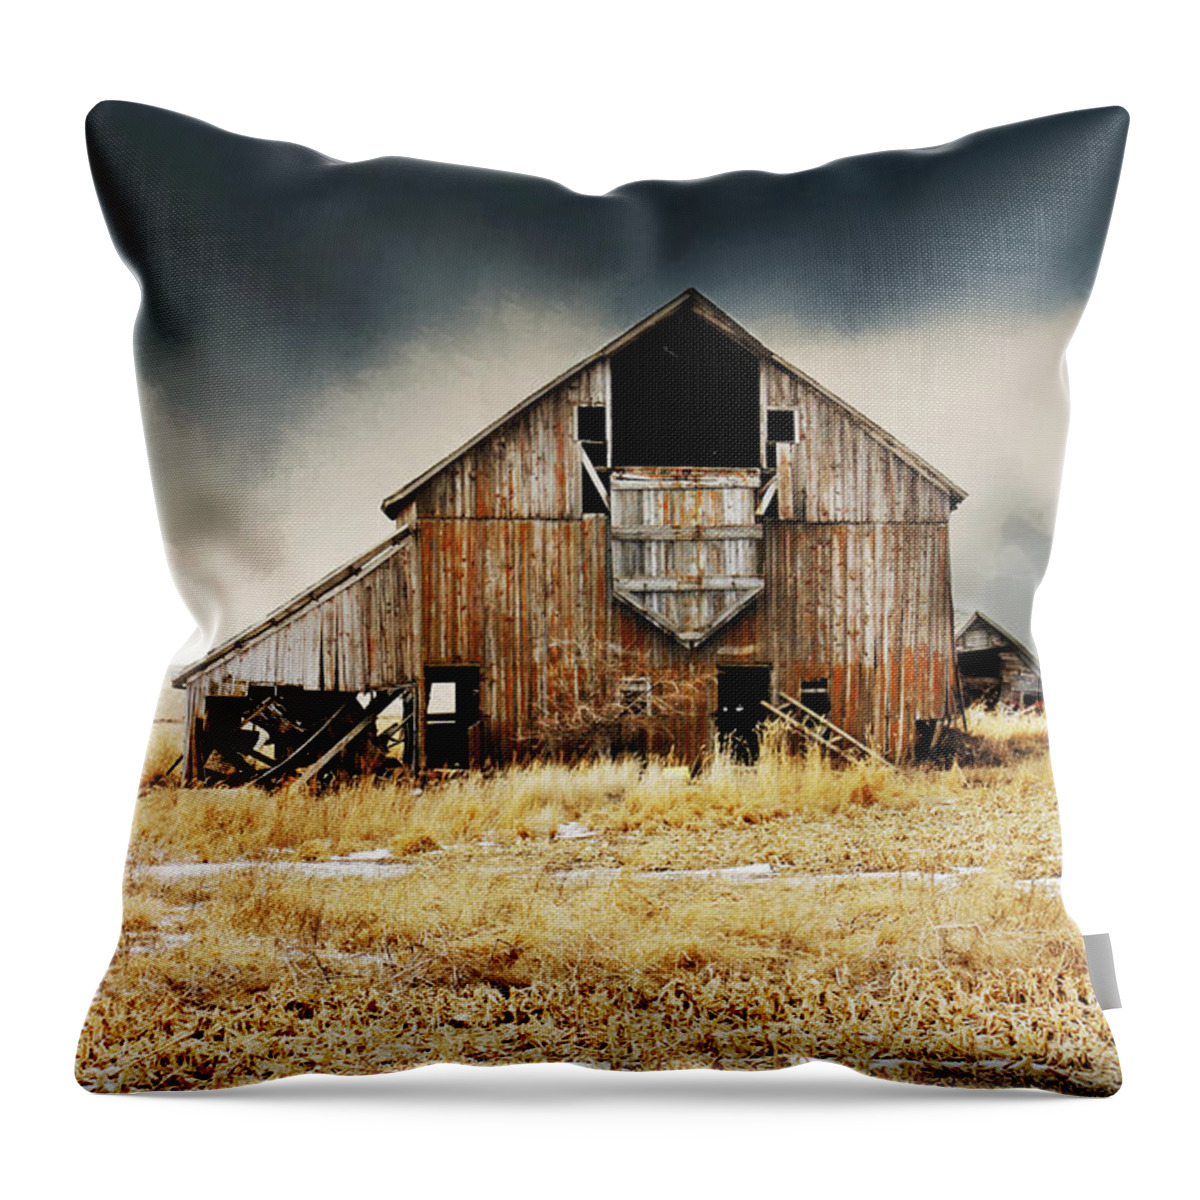 Barn Throw Pillow featuring the photograph Making History by Julie Hamilton